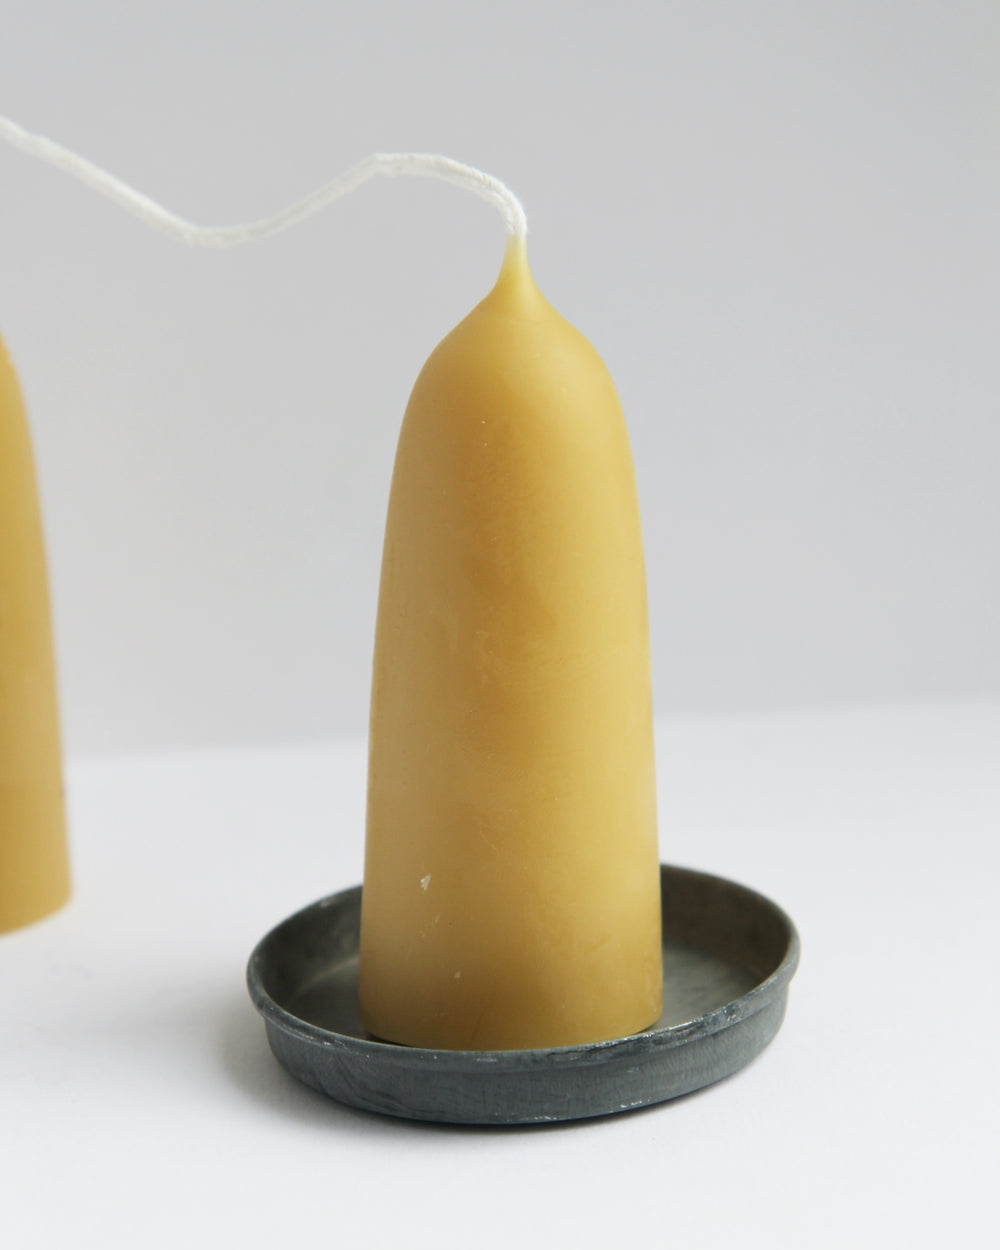 Pair of Stumpy Beeswax Candles - Domestic Science Home